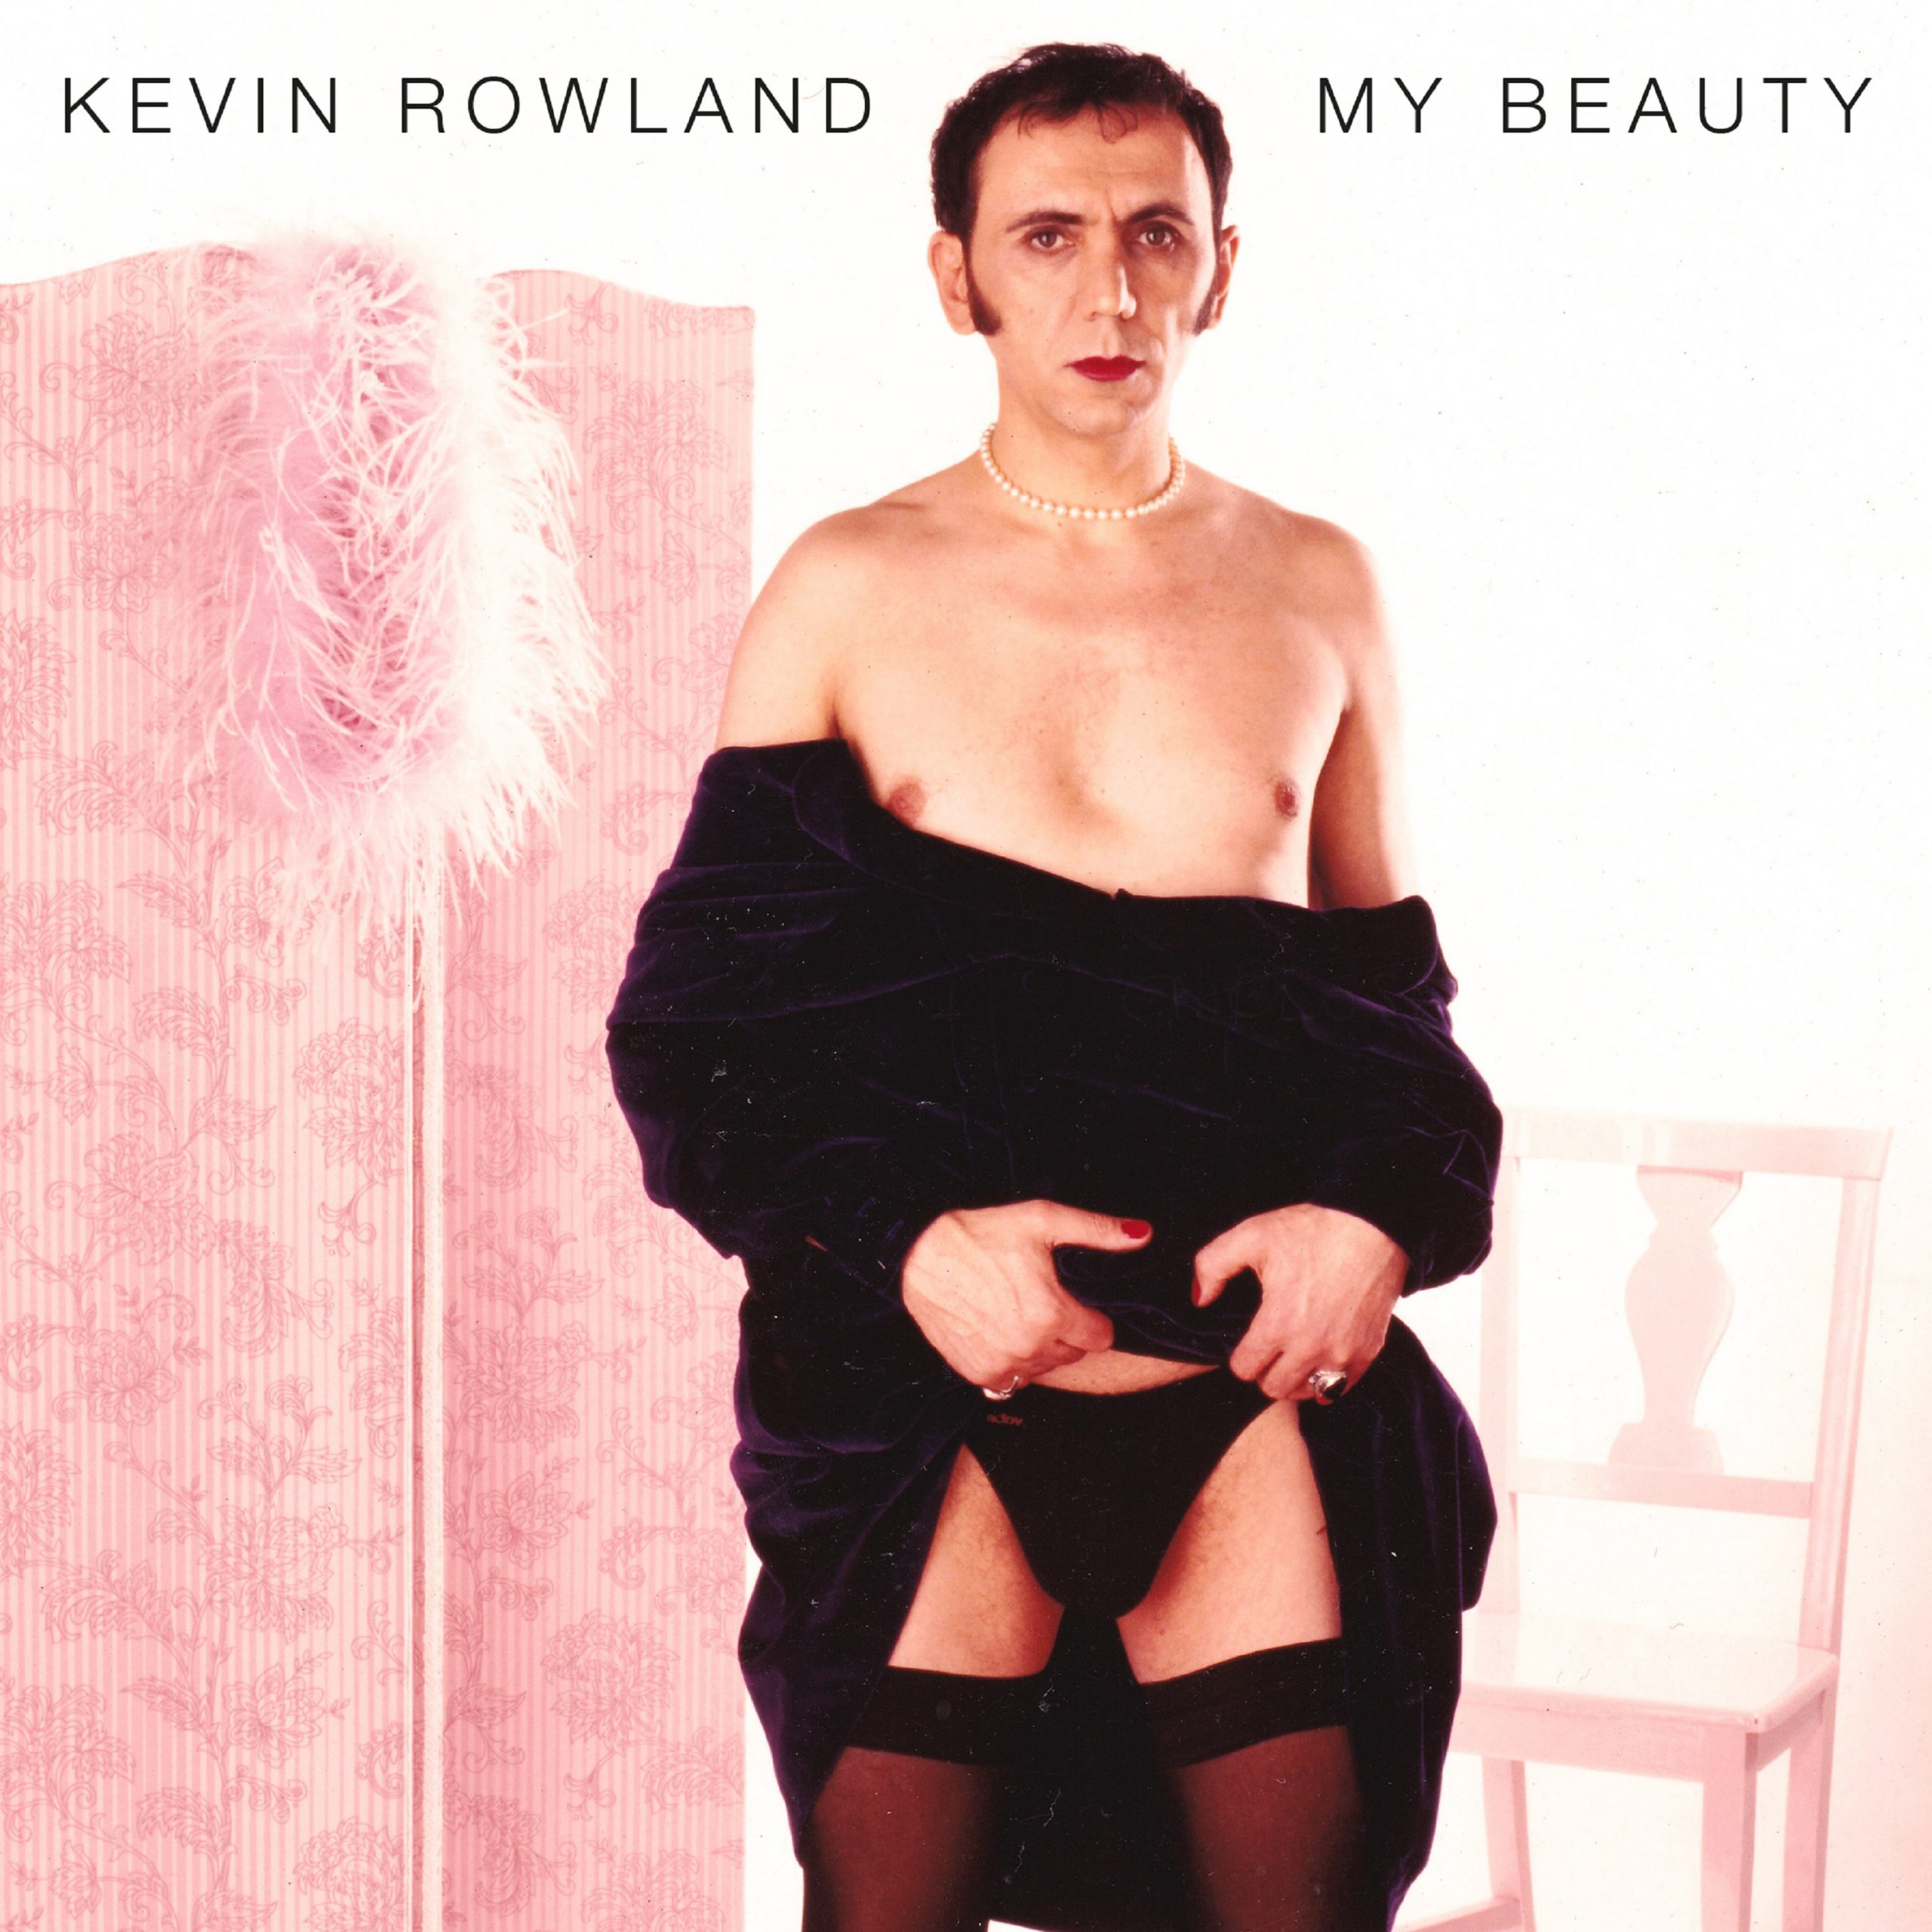 Kevin Rowland "My beauty" LP